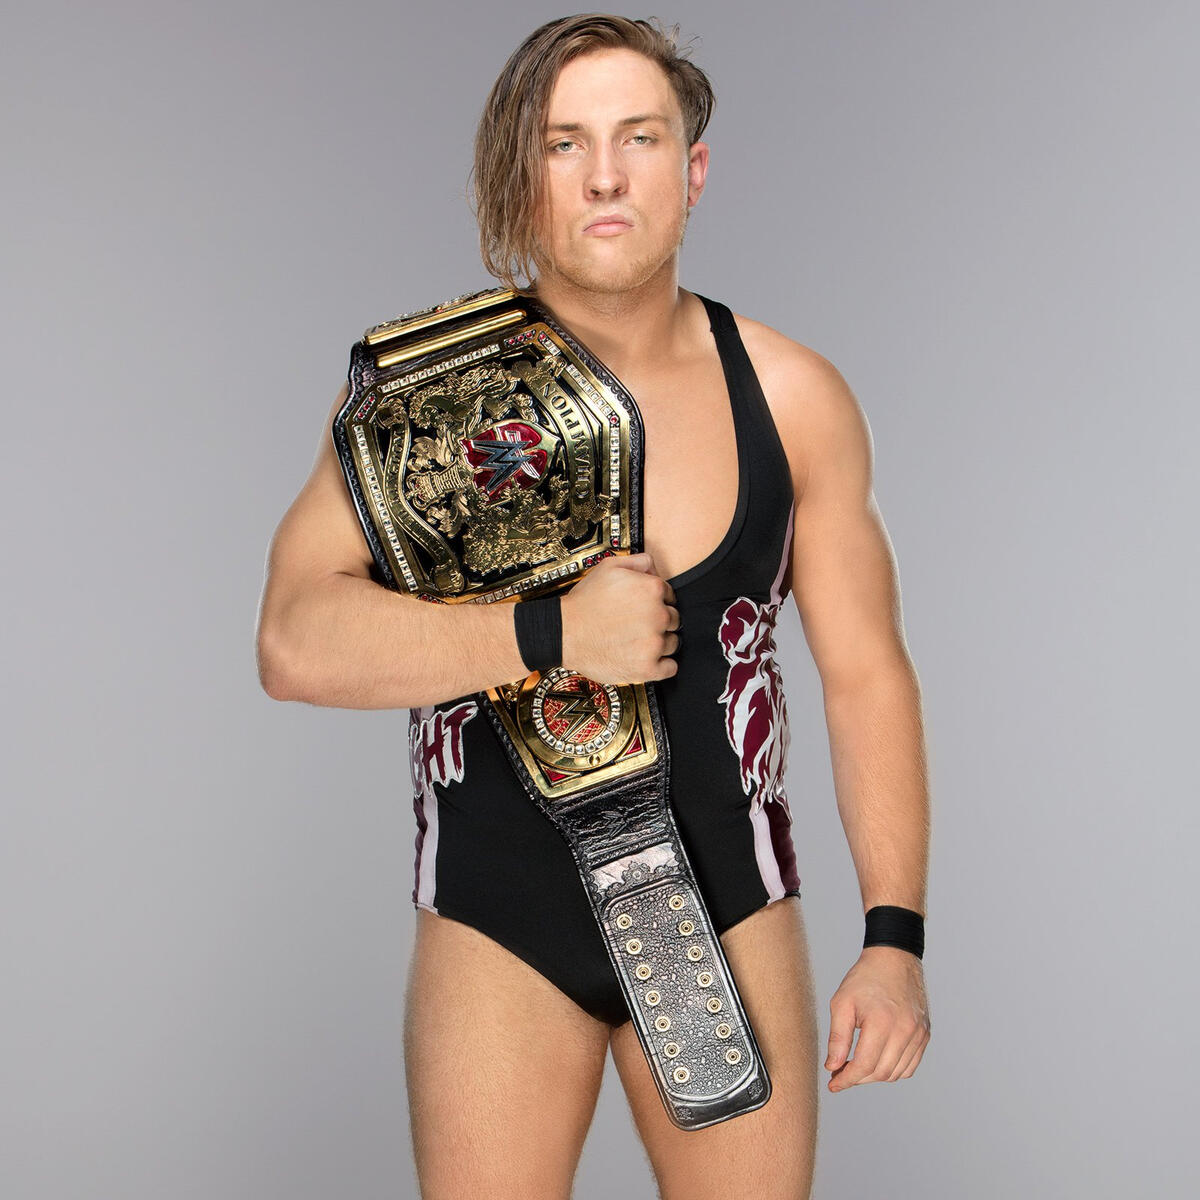 Pete Dunne's first photo shoot as United Kingdom photos |